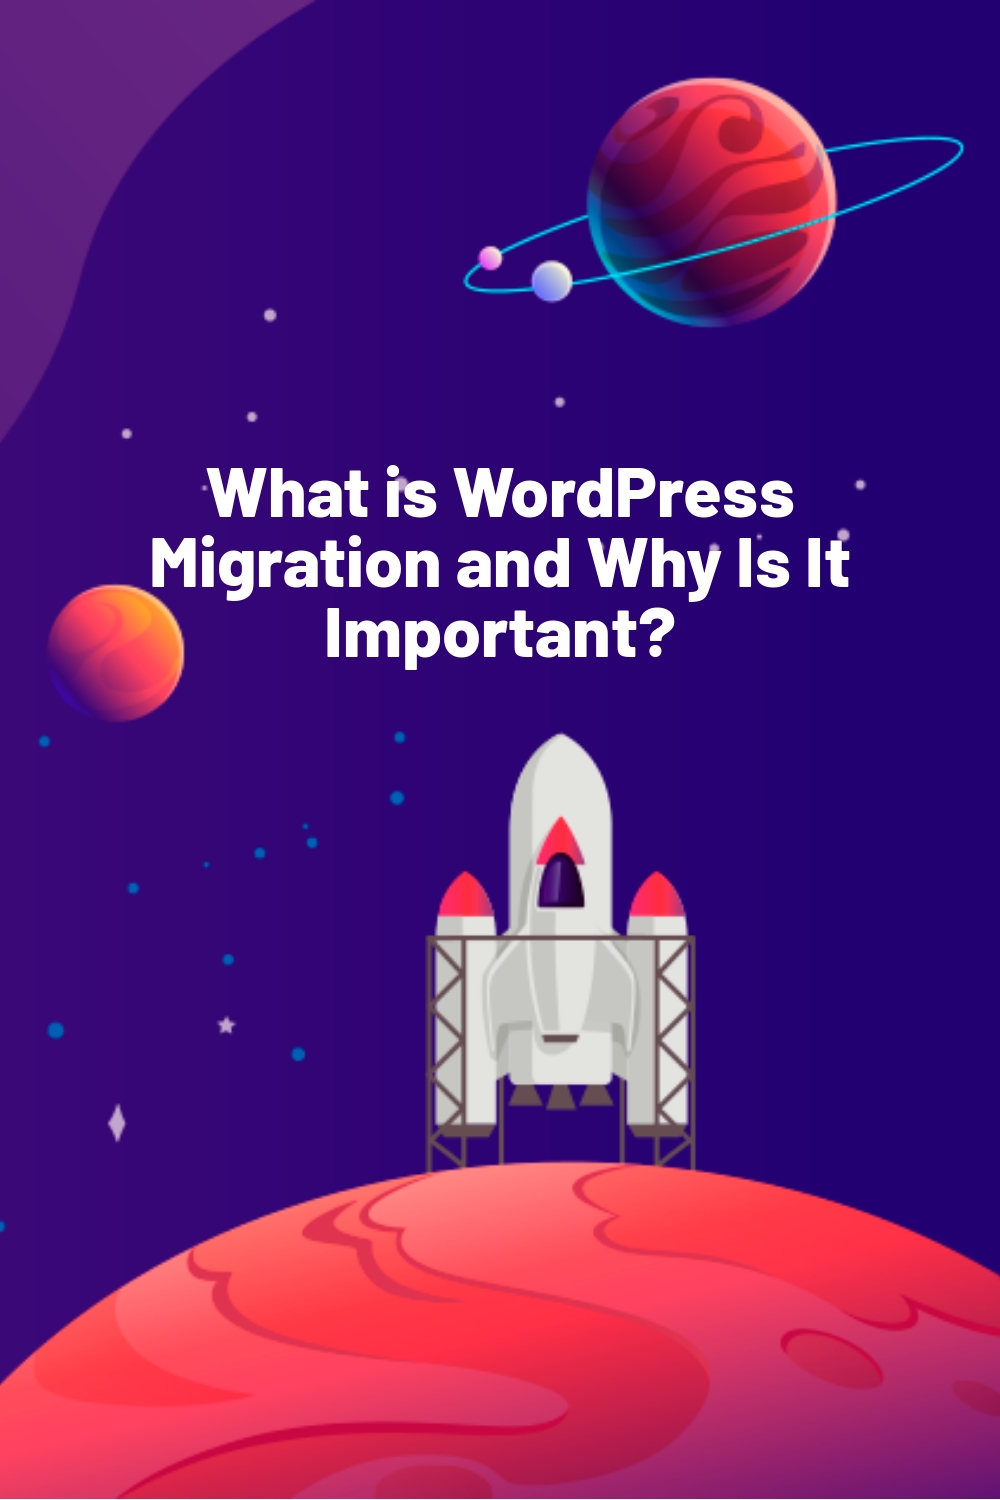 What is WordPress Migration and Why Is It Important?